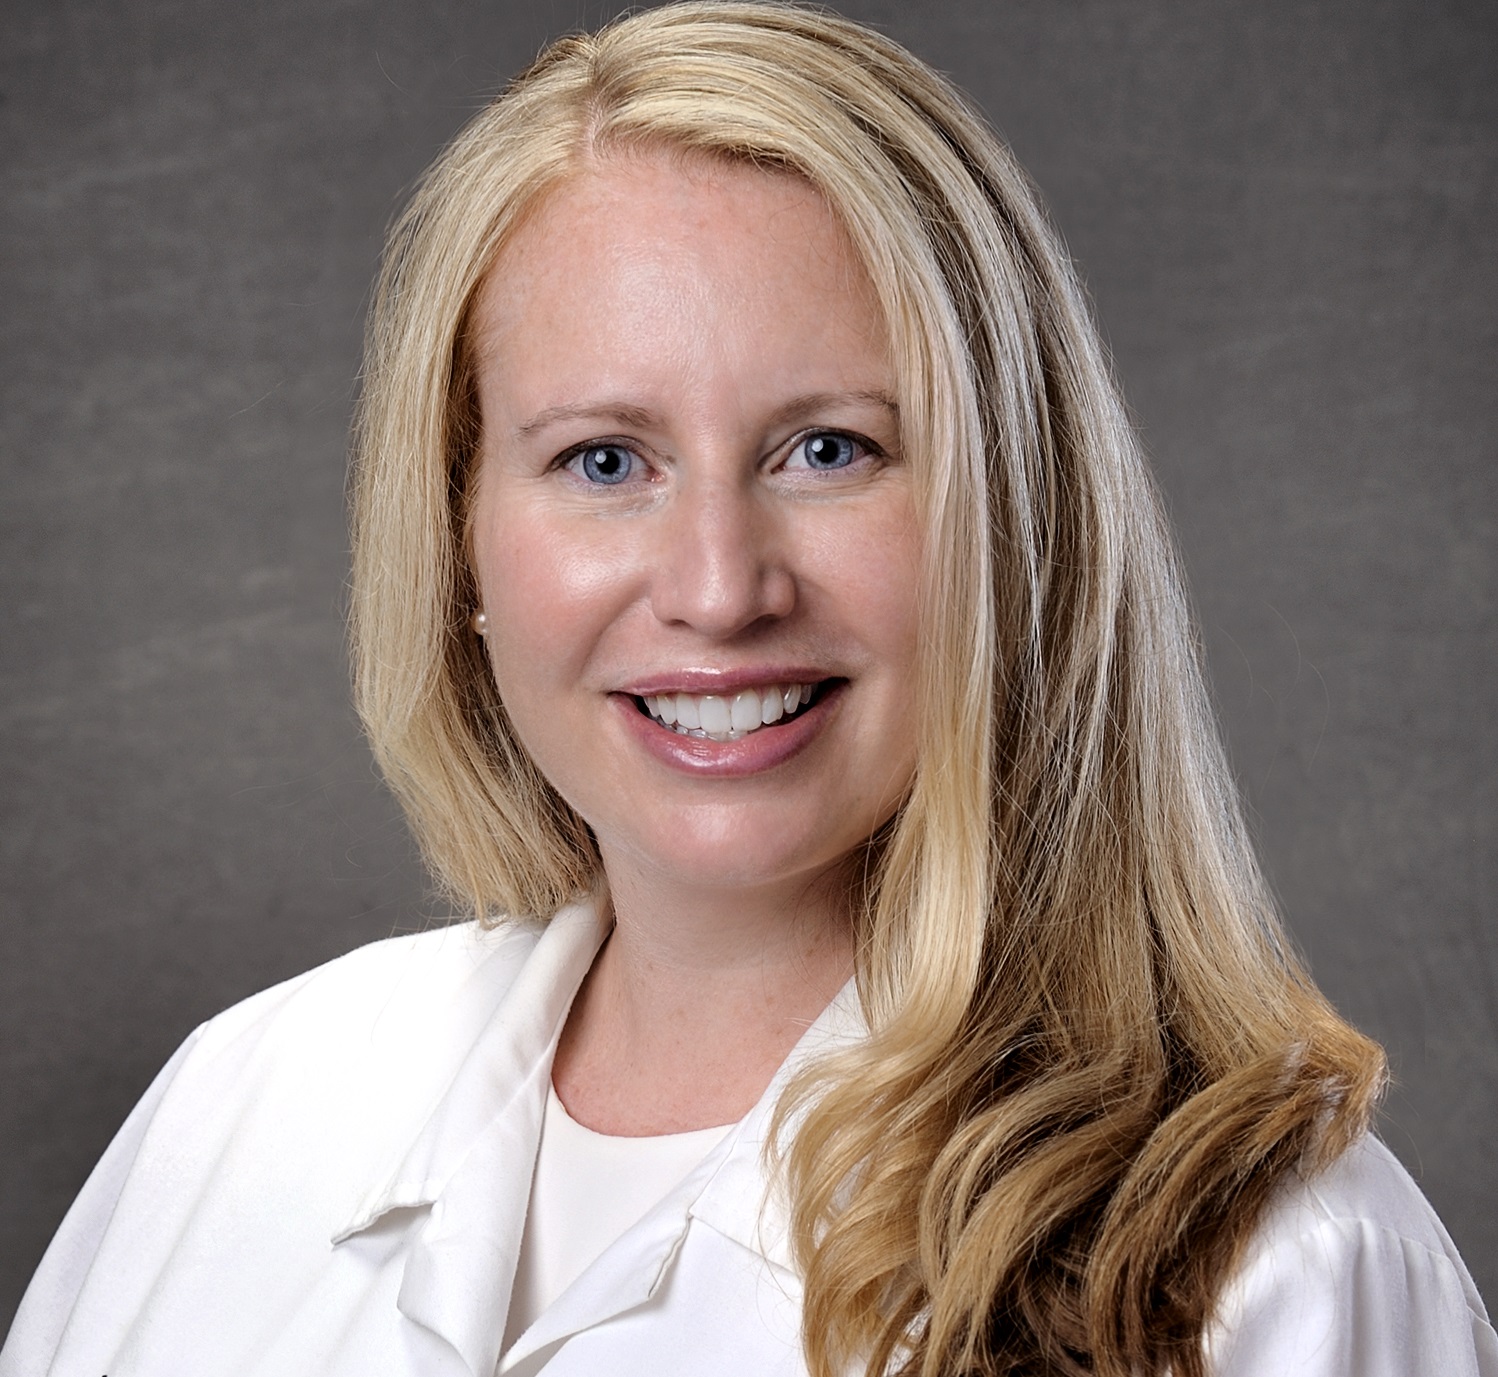 Company news: Associates for Women's Medicine adds Dr. Catherine Bailey to practice - syracuse.com